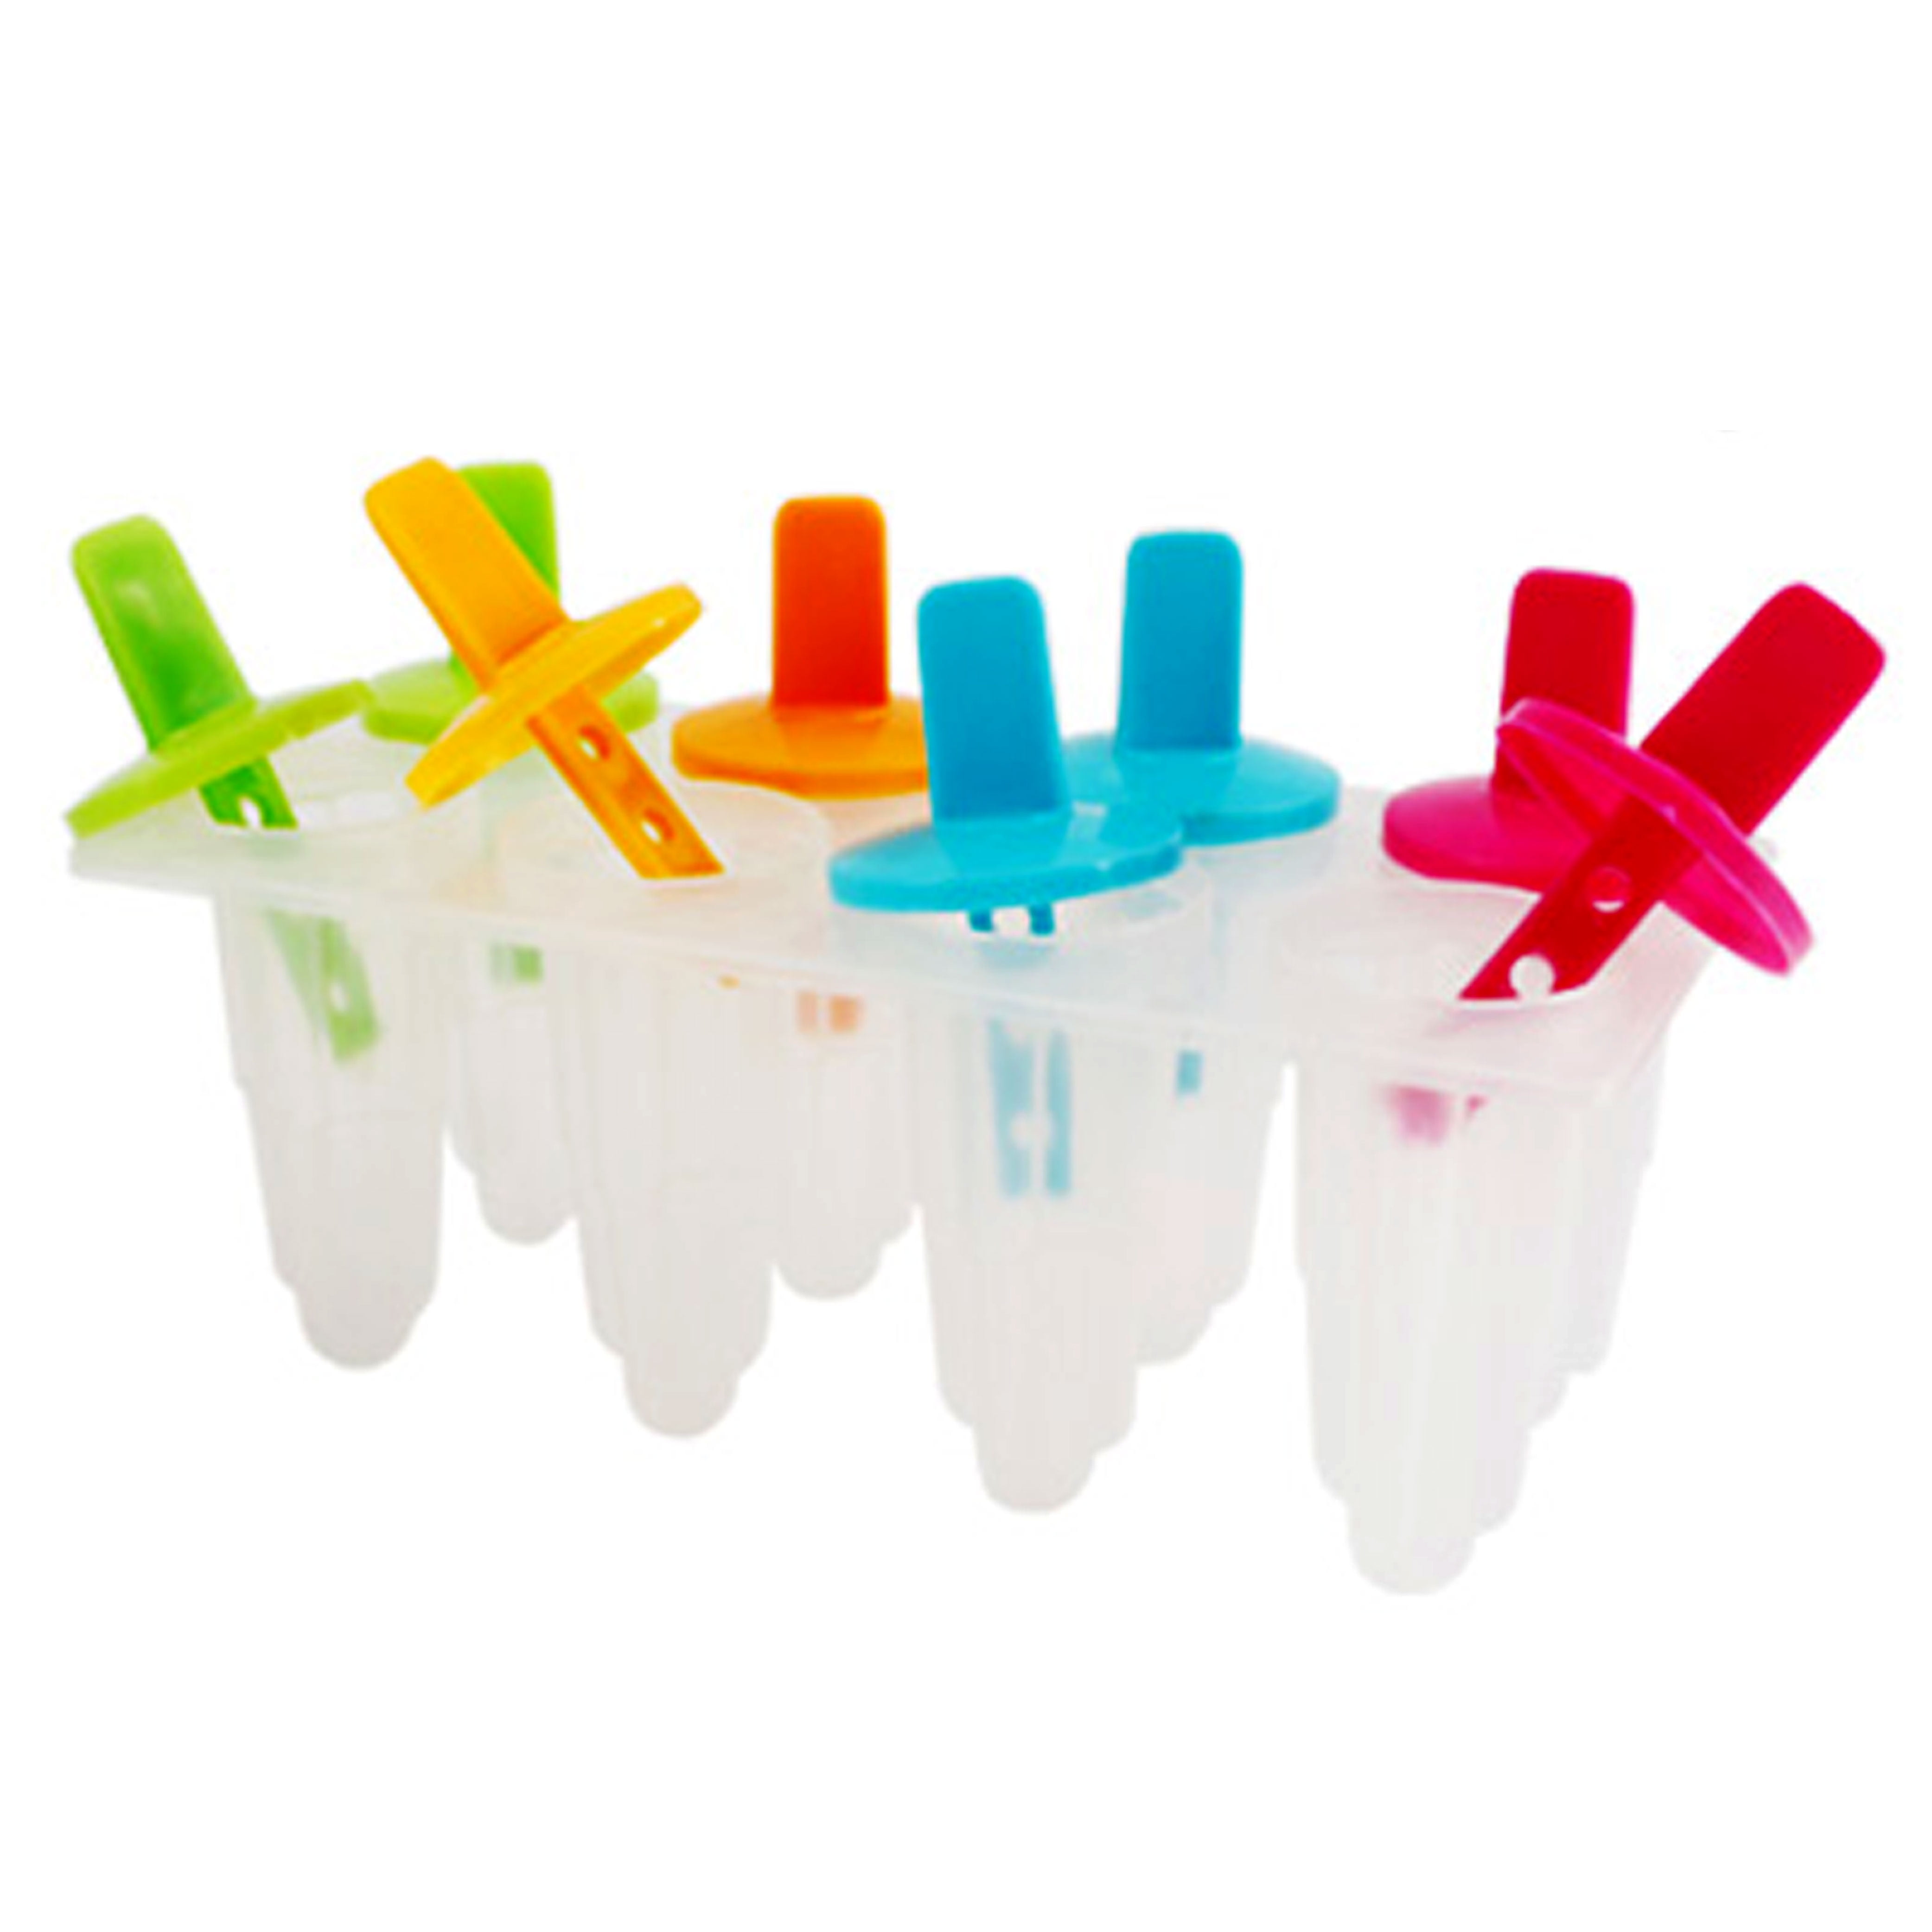 US$ 15.99 - Plastic Popsicles Molds for 8 Popsicle Makers, Ice Pop